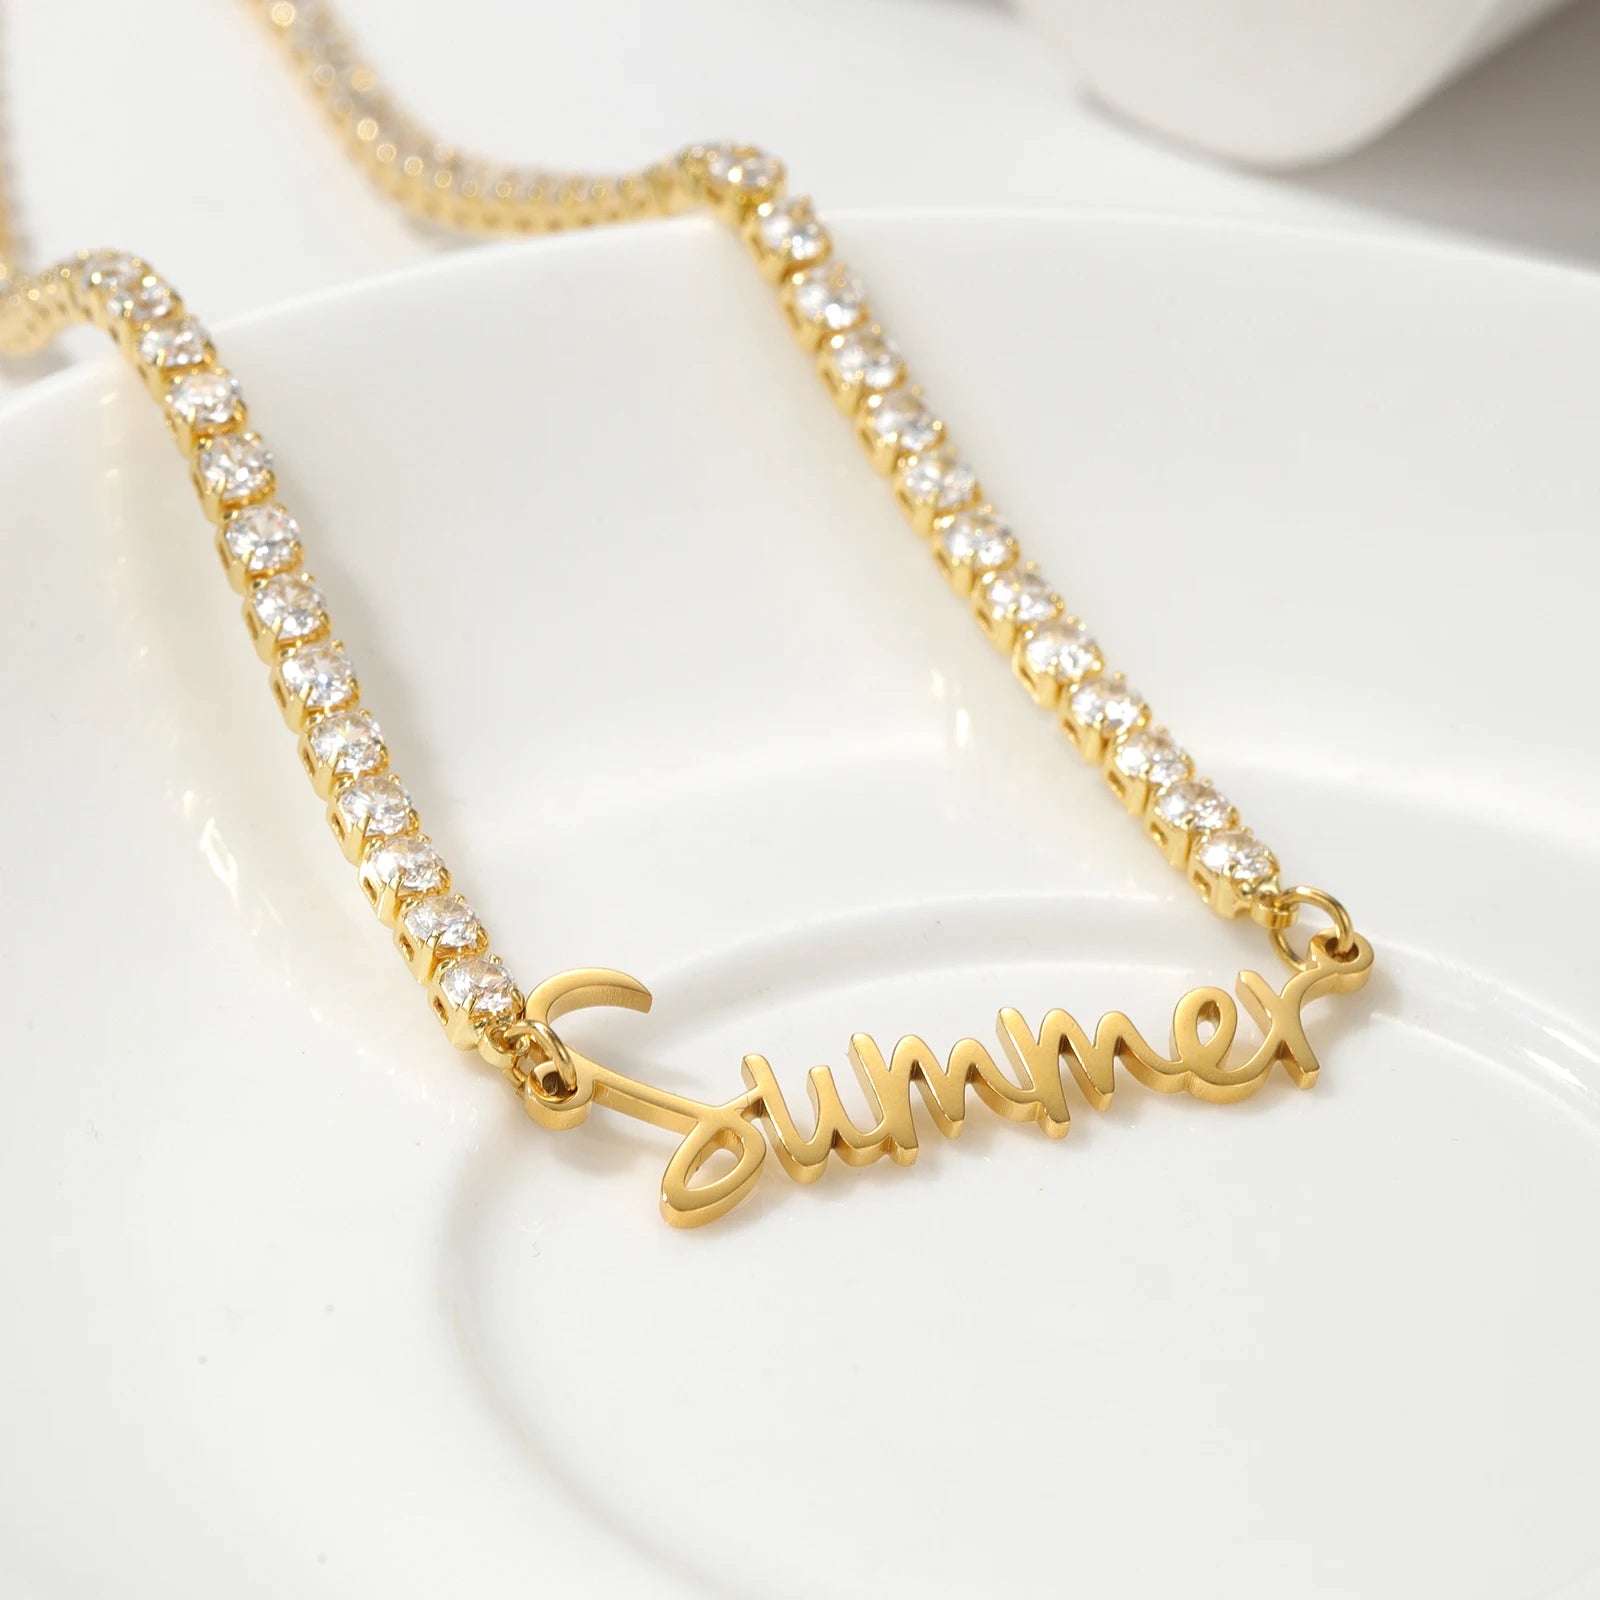 Personalized Signature Tennis Chain Necklace